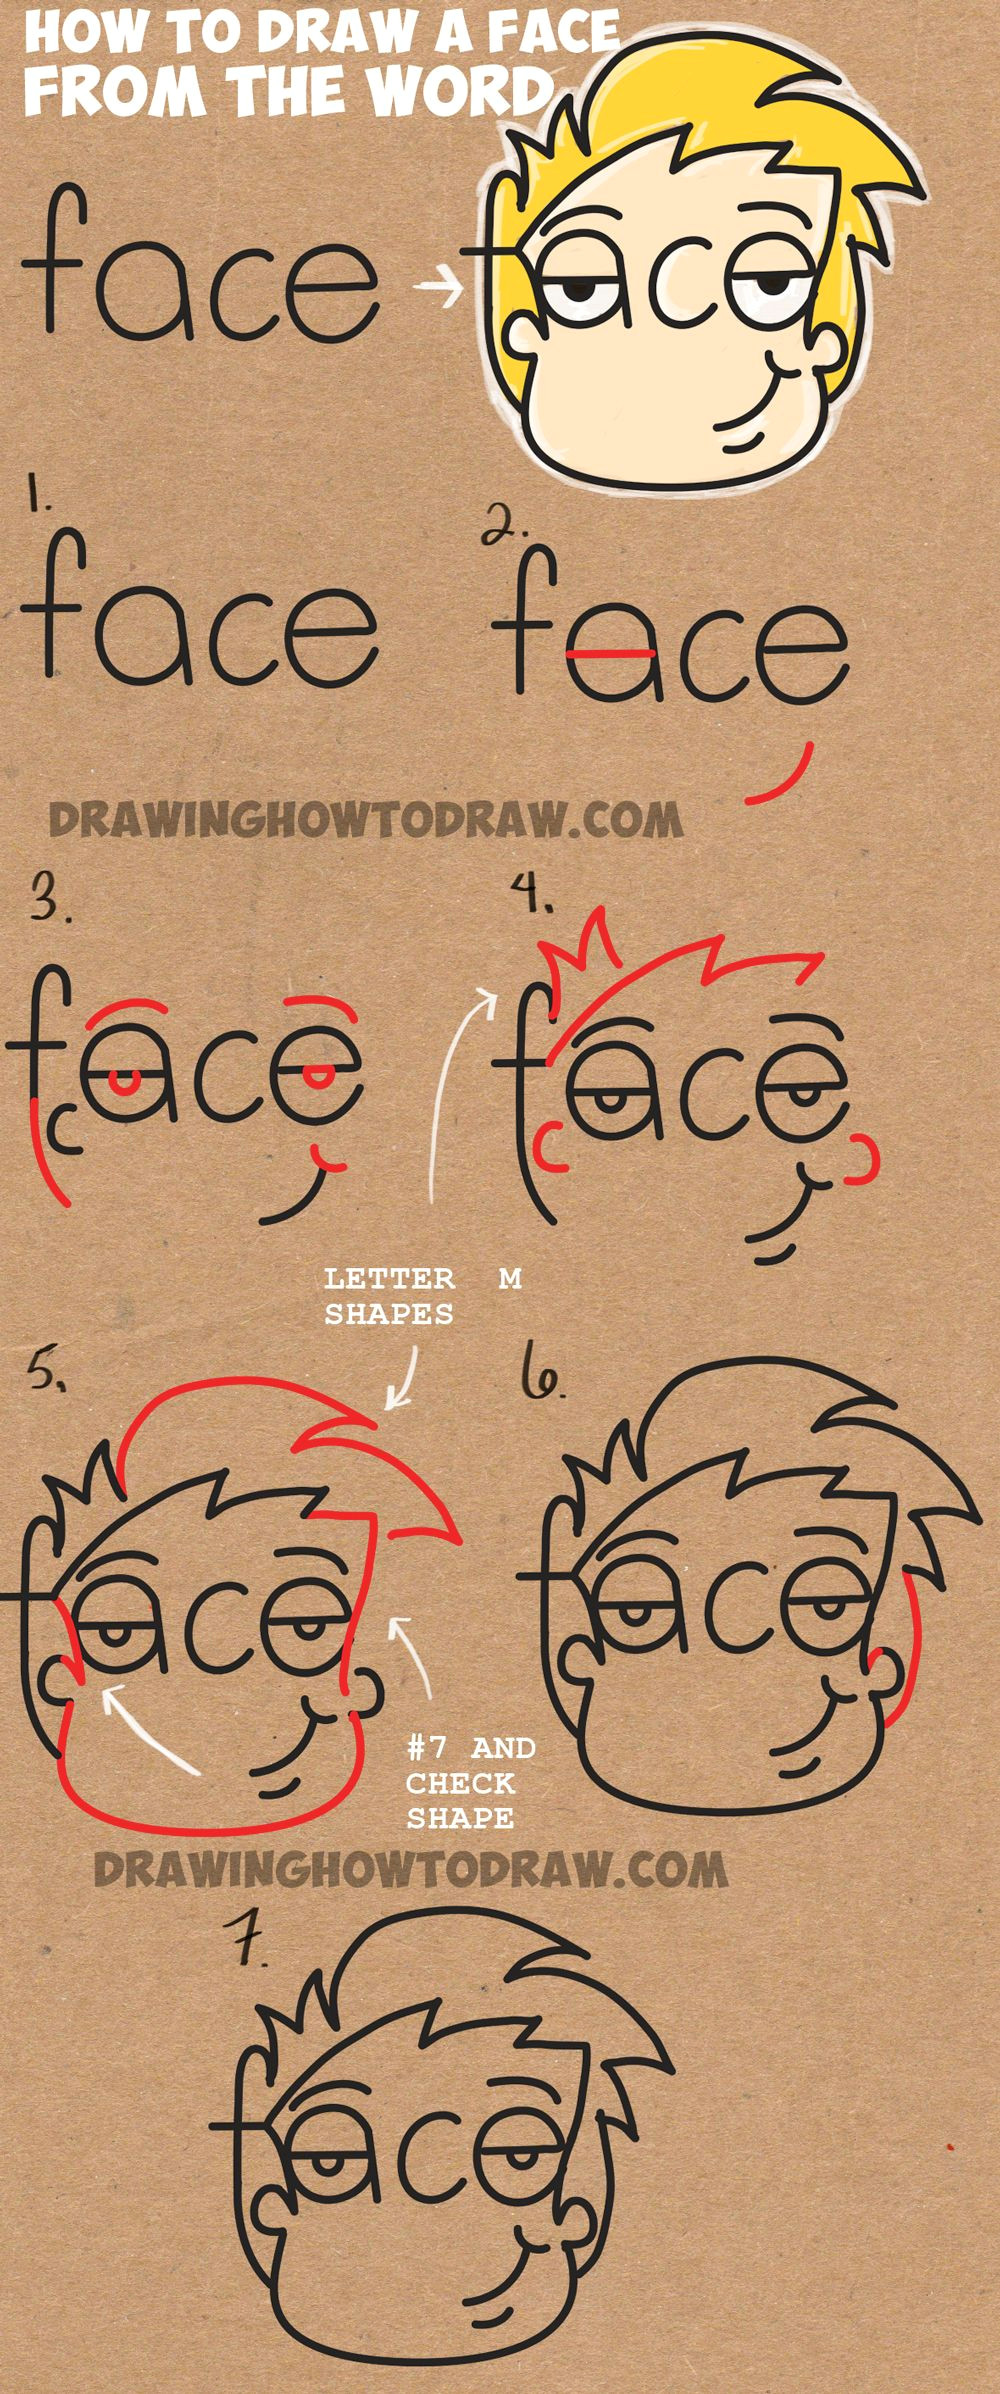 Cartoon Drawing Using Numbers How to Draw Cartoon Faces From the Word Face Easy Step by Step